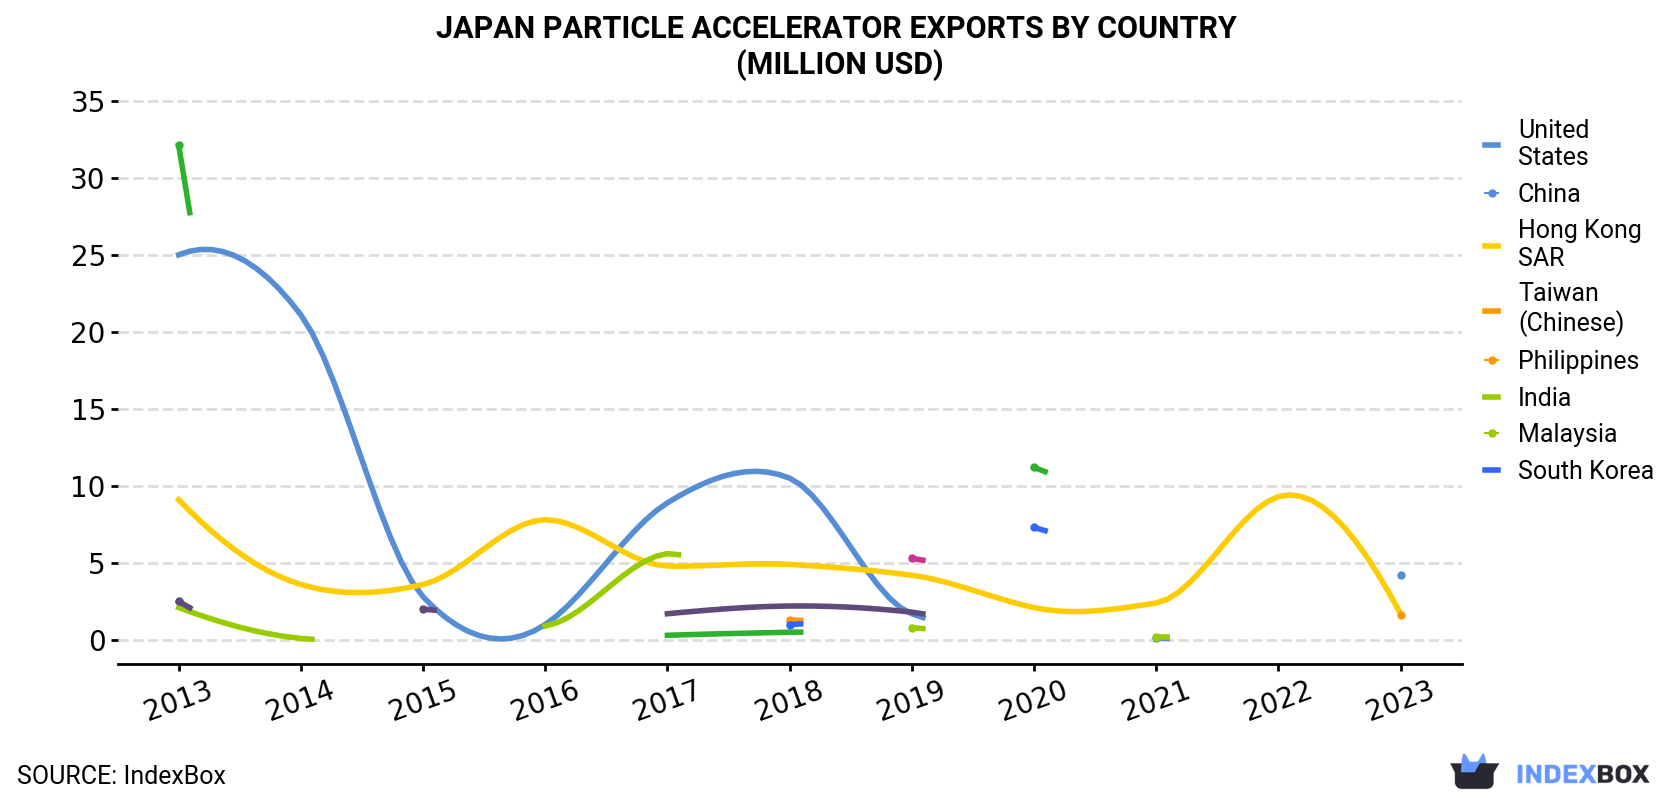 Japan Particle Accelerator Exports By Country (Million USD)